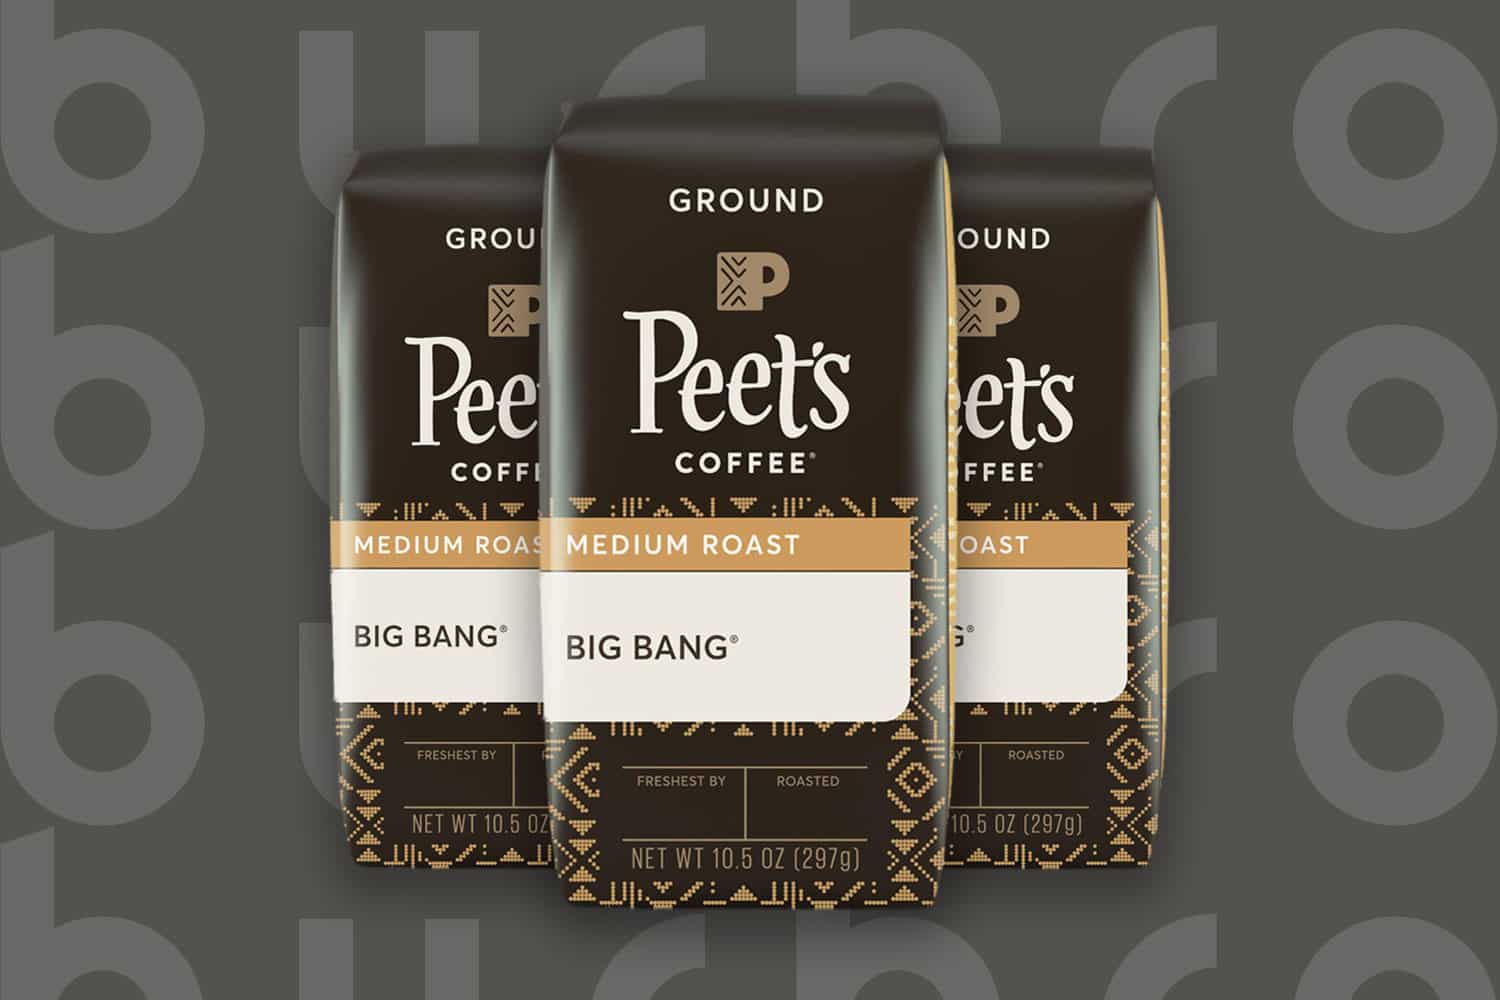 This is the cover photo for our Best Medium Roast Coffee article. It features three bags of Peet's Big Bang Medium Roast coffee overlaid on a chocolate brown background.